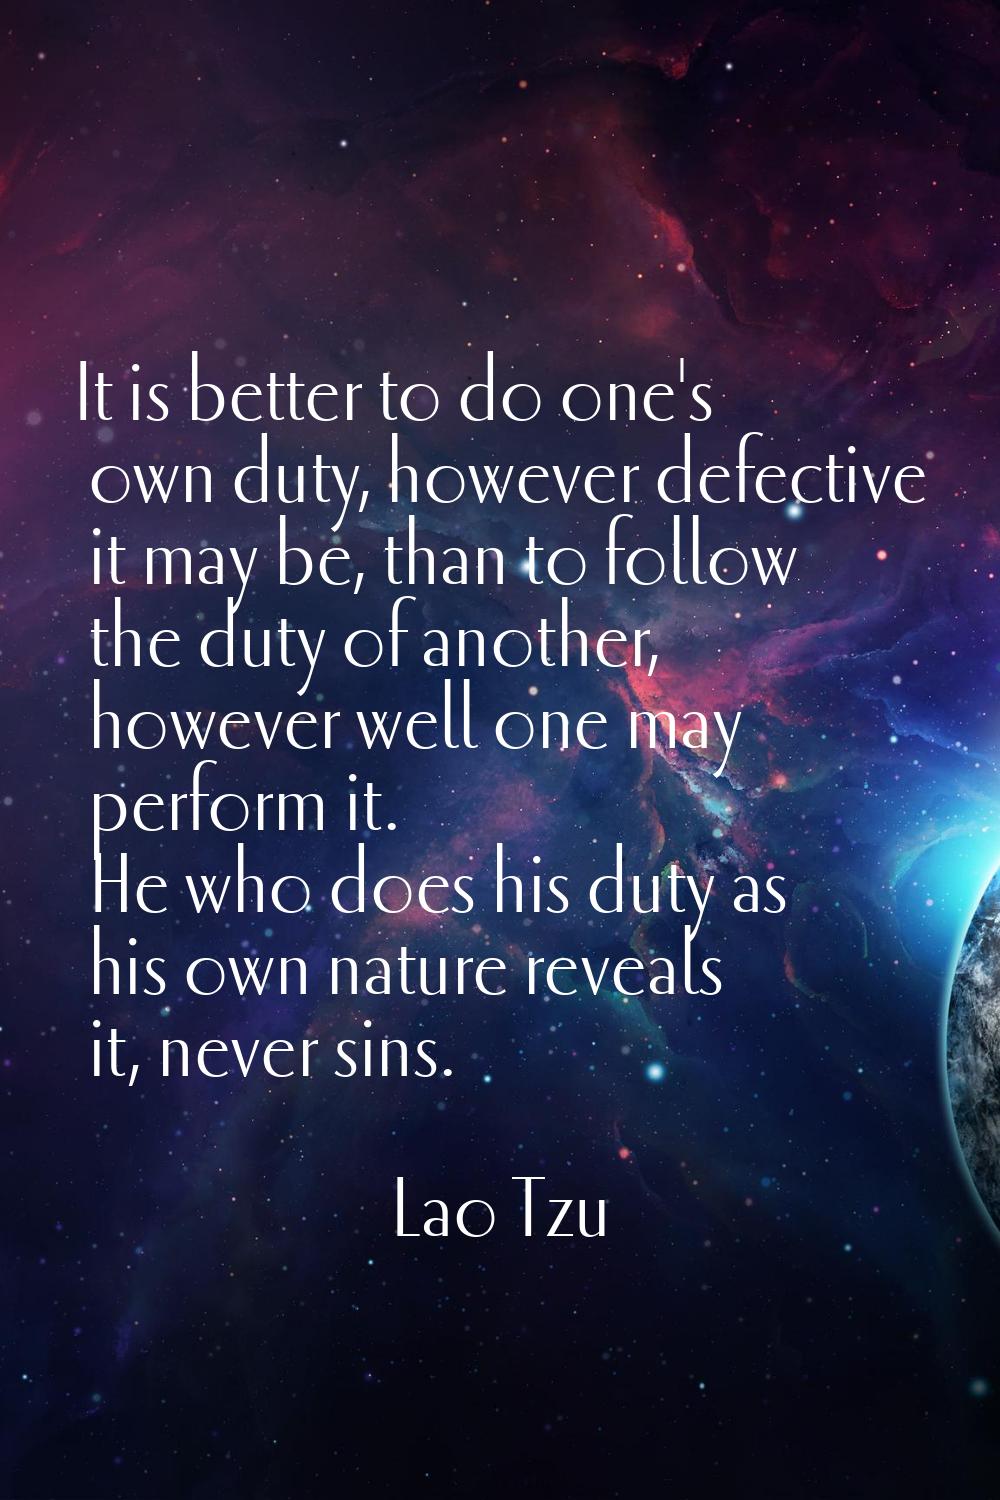 It is better to do one's own duty, however defective it may be, than to follow the duty of another,